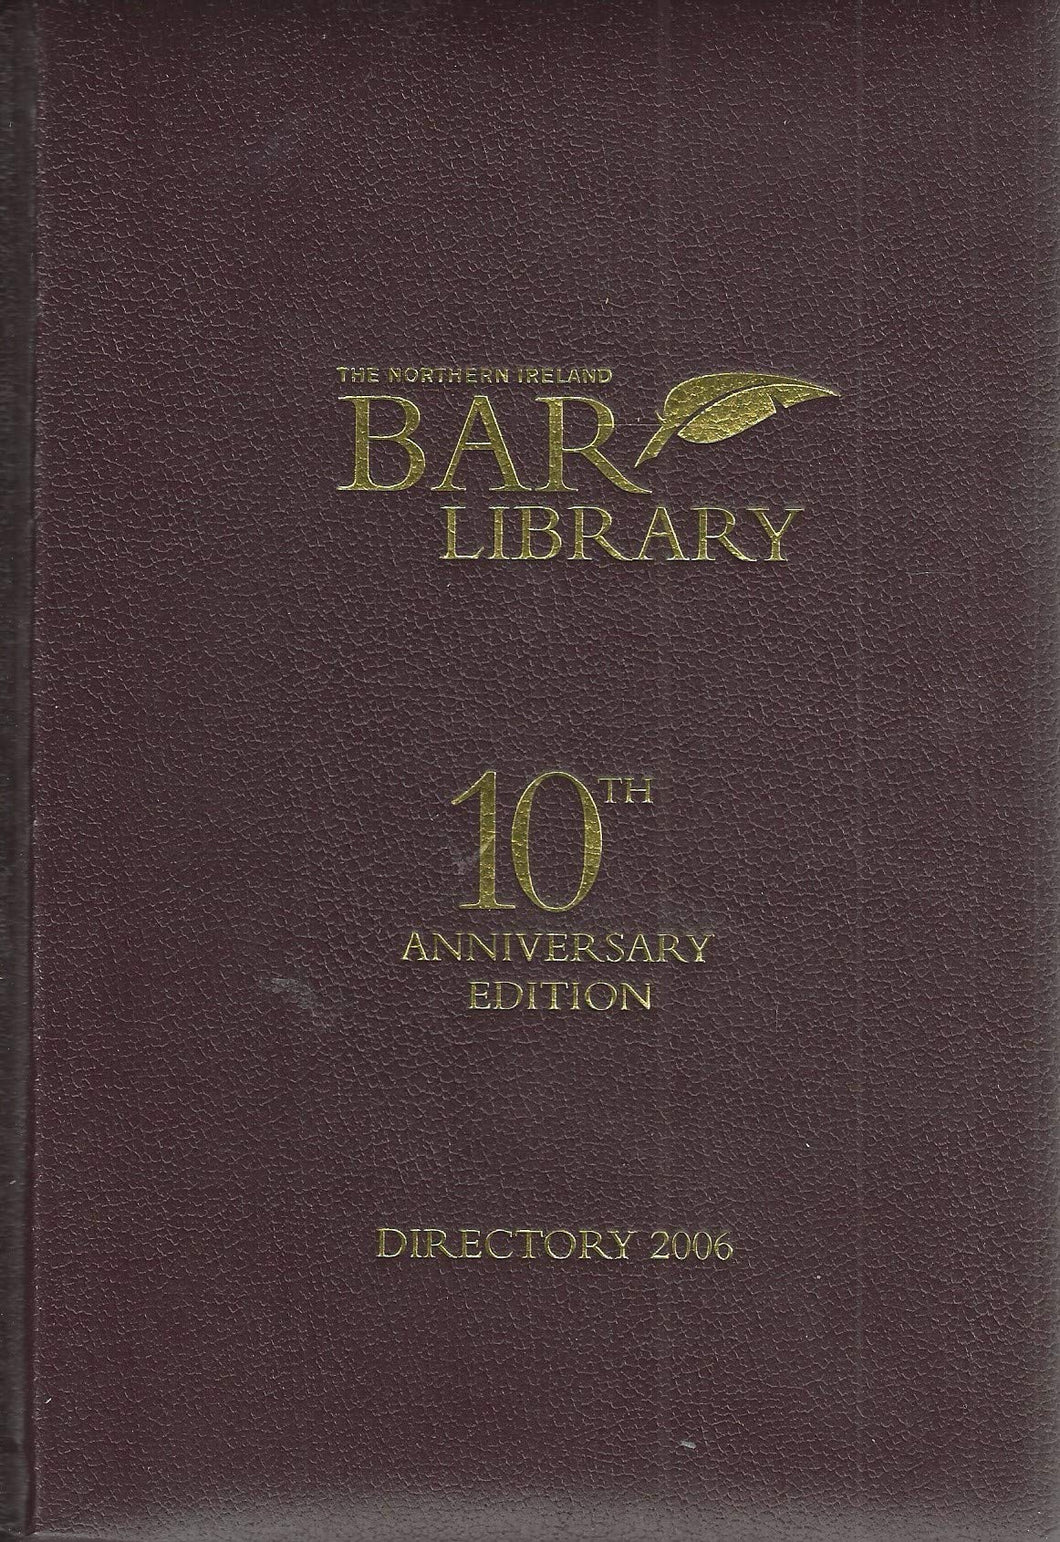 The Northern Ireland Bar Library Directory 2006 - 10th Anniversary Edition